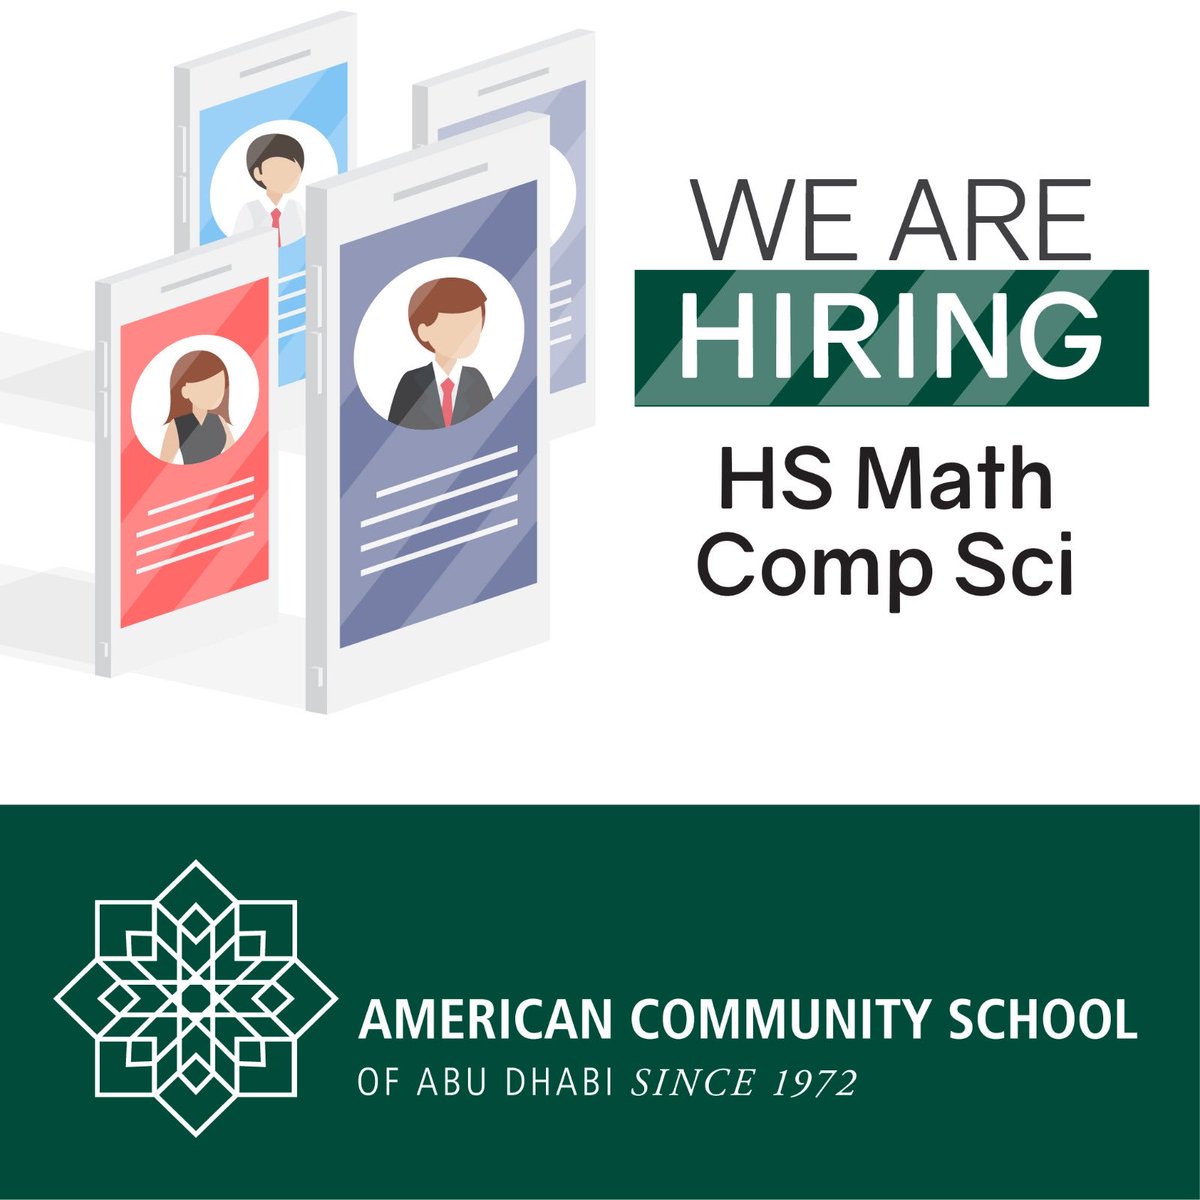 We're looking for a High School Math Comp Sci teacher to join @ACSAbuDhabi in 2023-24. Our philosophy is based on a balanced education and the creation of a learning environment that best serves our students. Learn how to apply: bit.ly/3cbprKA